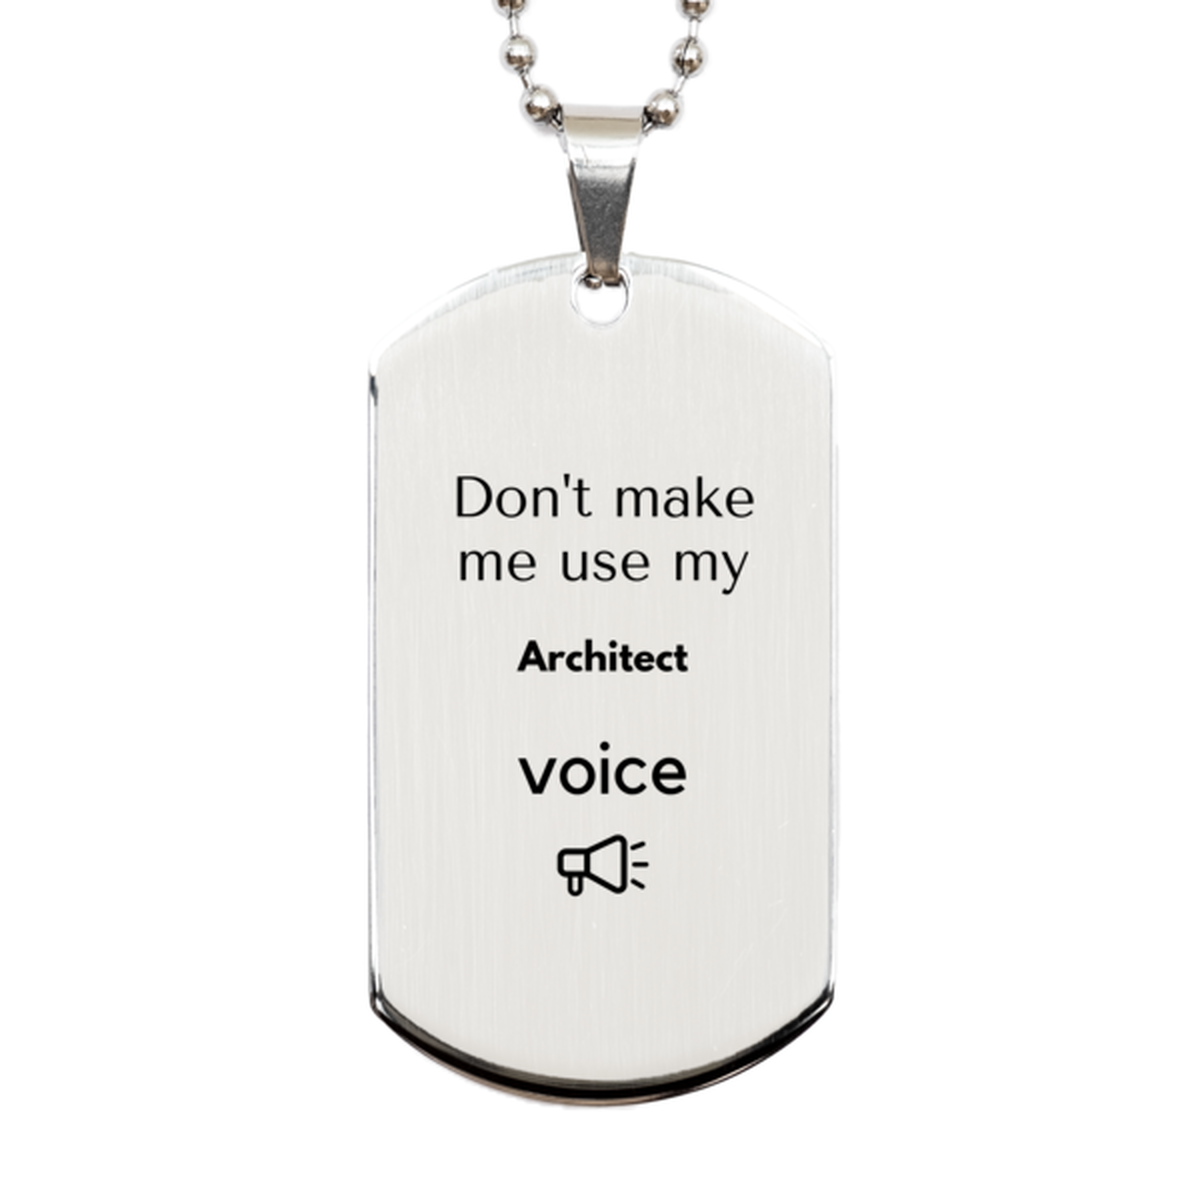 Don't make me use my Architect voice, Sarcasm Architect Gifts, Christmas Architect Silver Dog Tag Birthday Unique Gifts For Architect Coworkers, Men, Women, Colleague, Friends